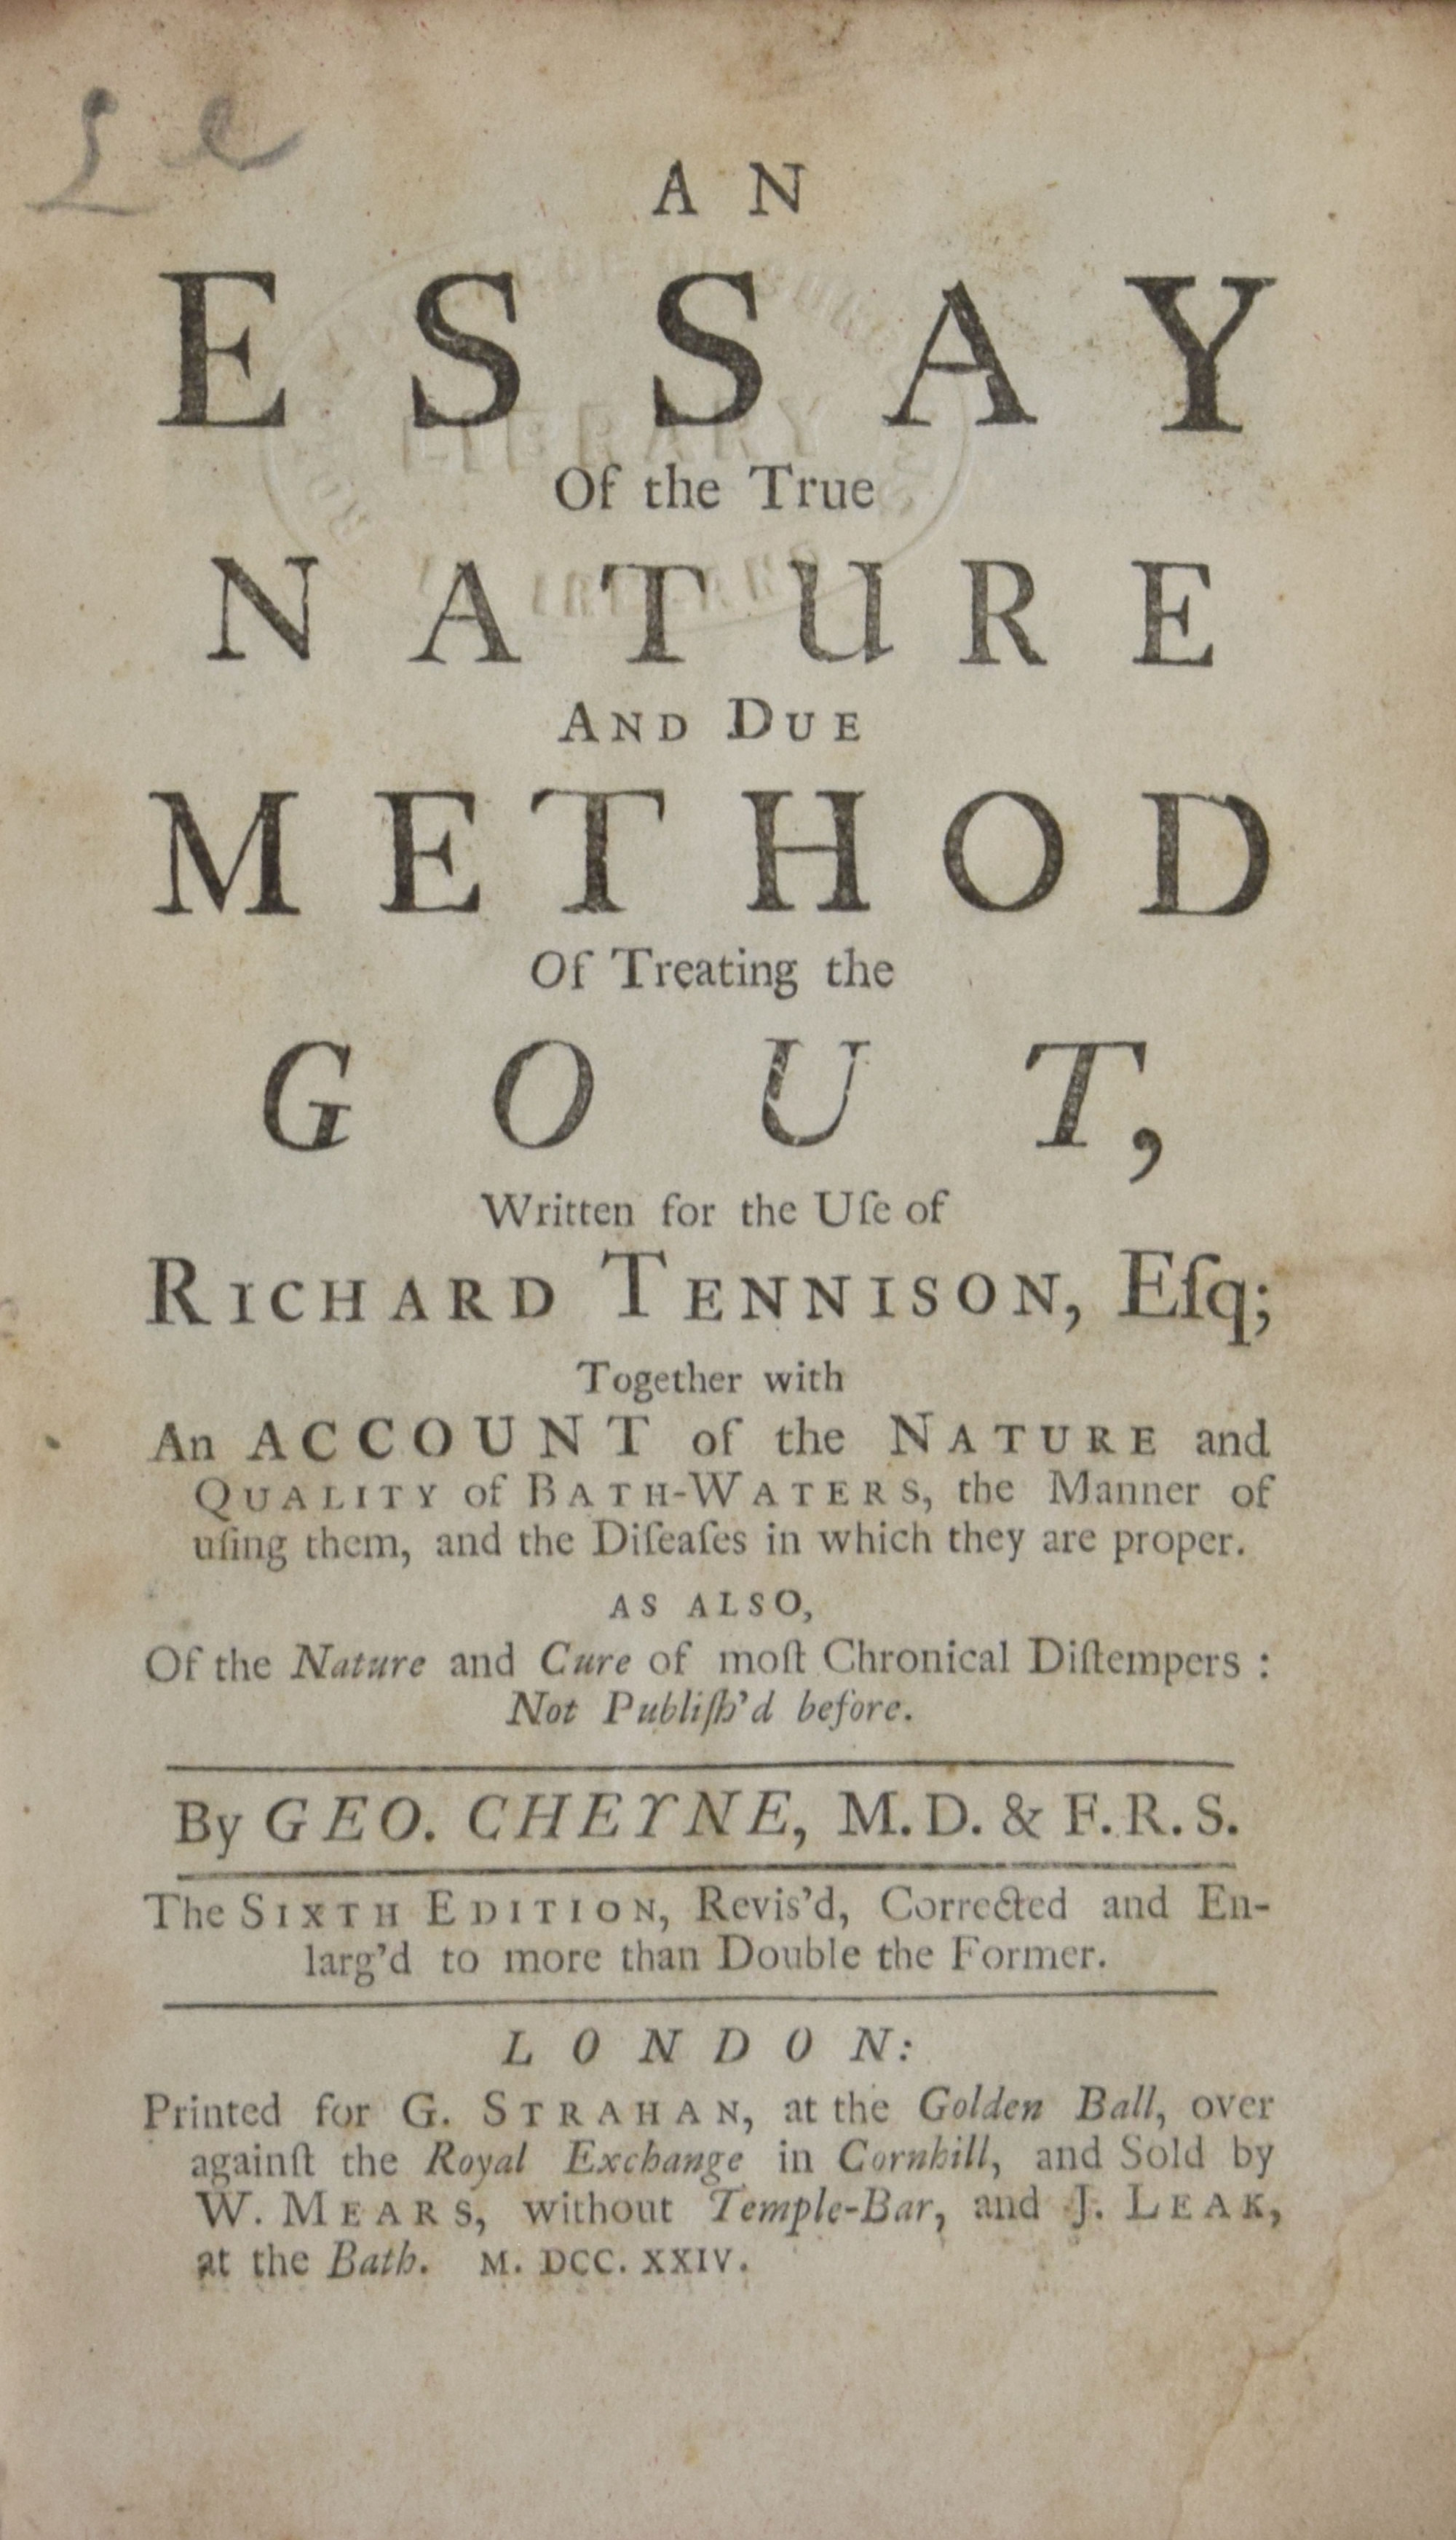 An Essay of the True Nature and Due method of Treating Gout, Written for the Use of Richard Tennison, Esq; Together with an Account of the Nature and Quality of Bath-Waters, the Manner of Using Them, and the Diseases in Which They are Proper.